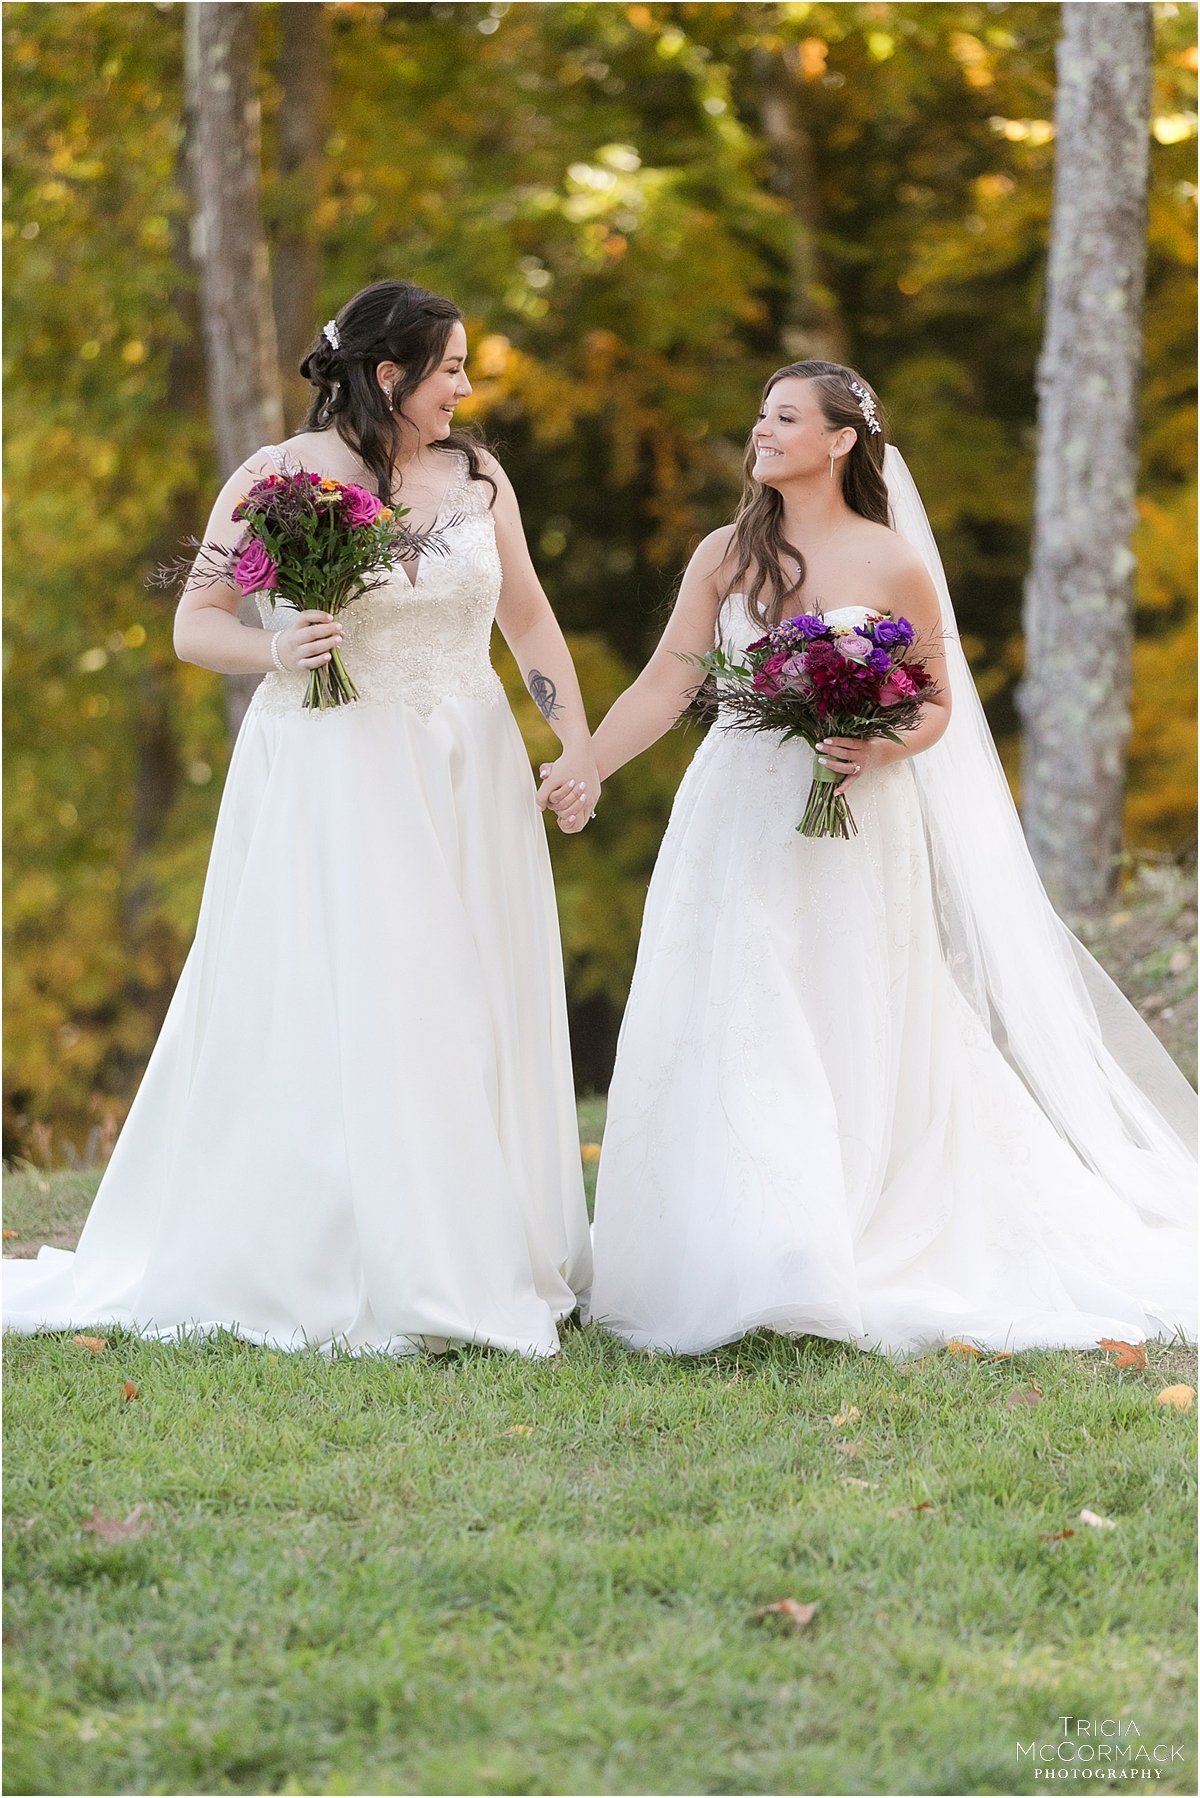 A jewel-toned fall wedding at The Mountain Rose Inn, Greenfield